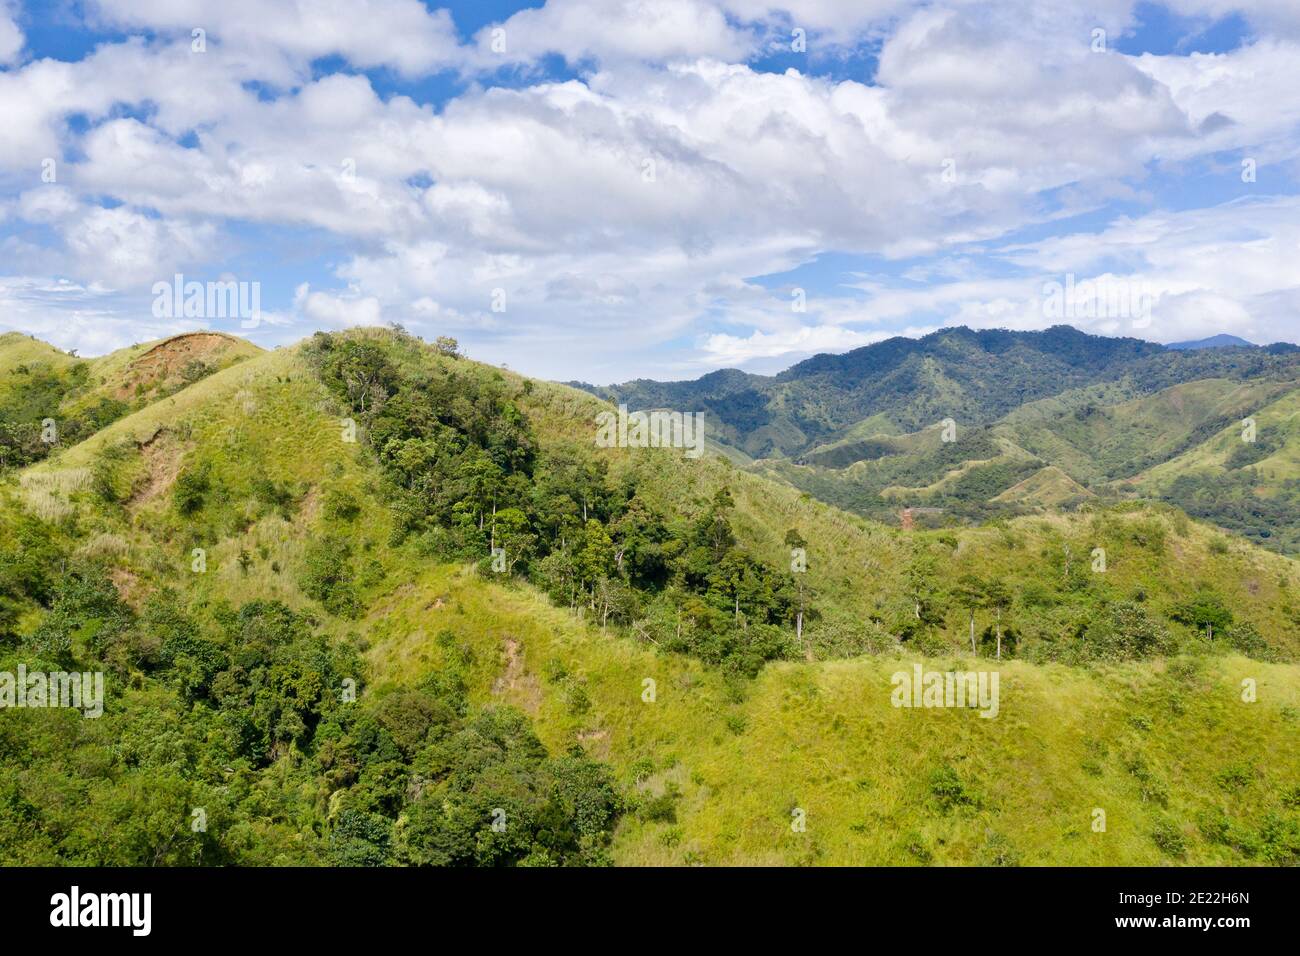 Mountain landscape with green hills and mountains with forest.Mountain valley and blue sky with clouds. Philippines, Luzon. Summer landscape. Stock Photo